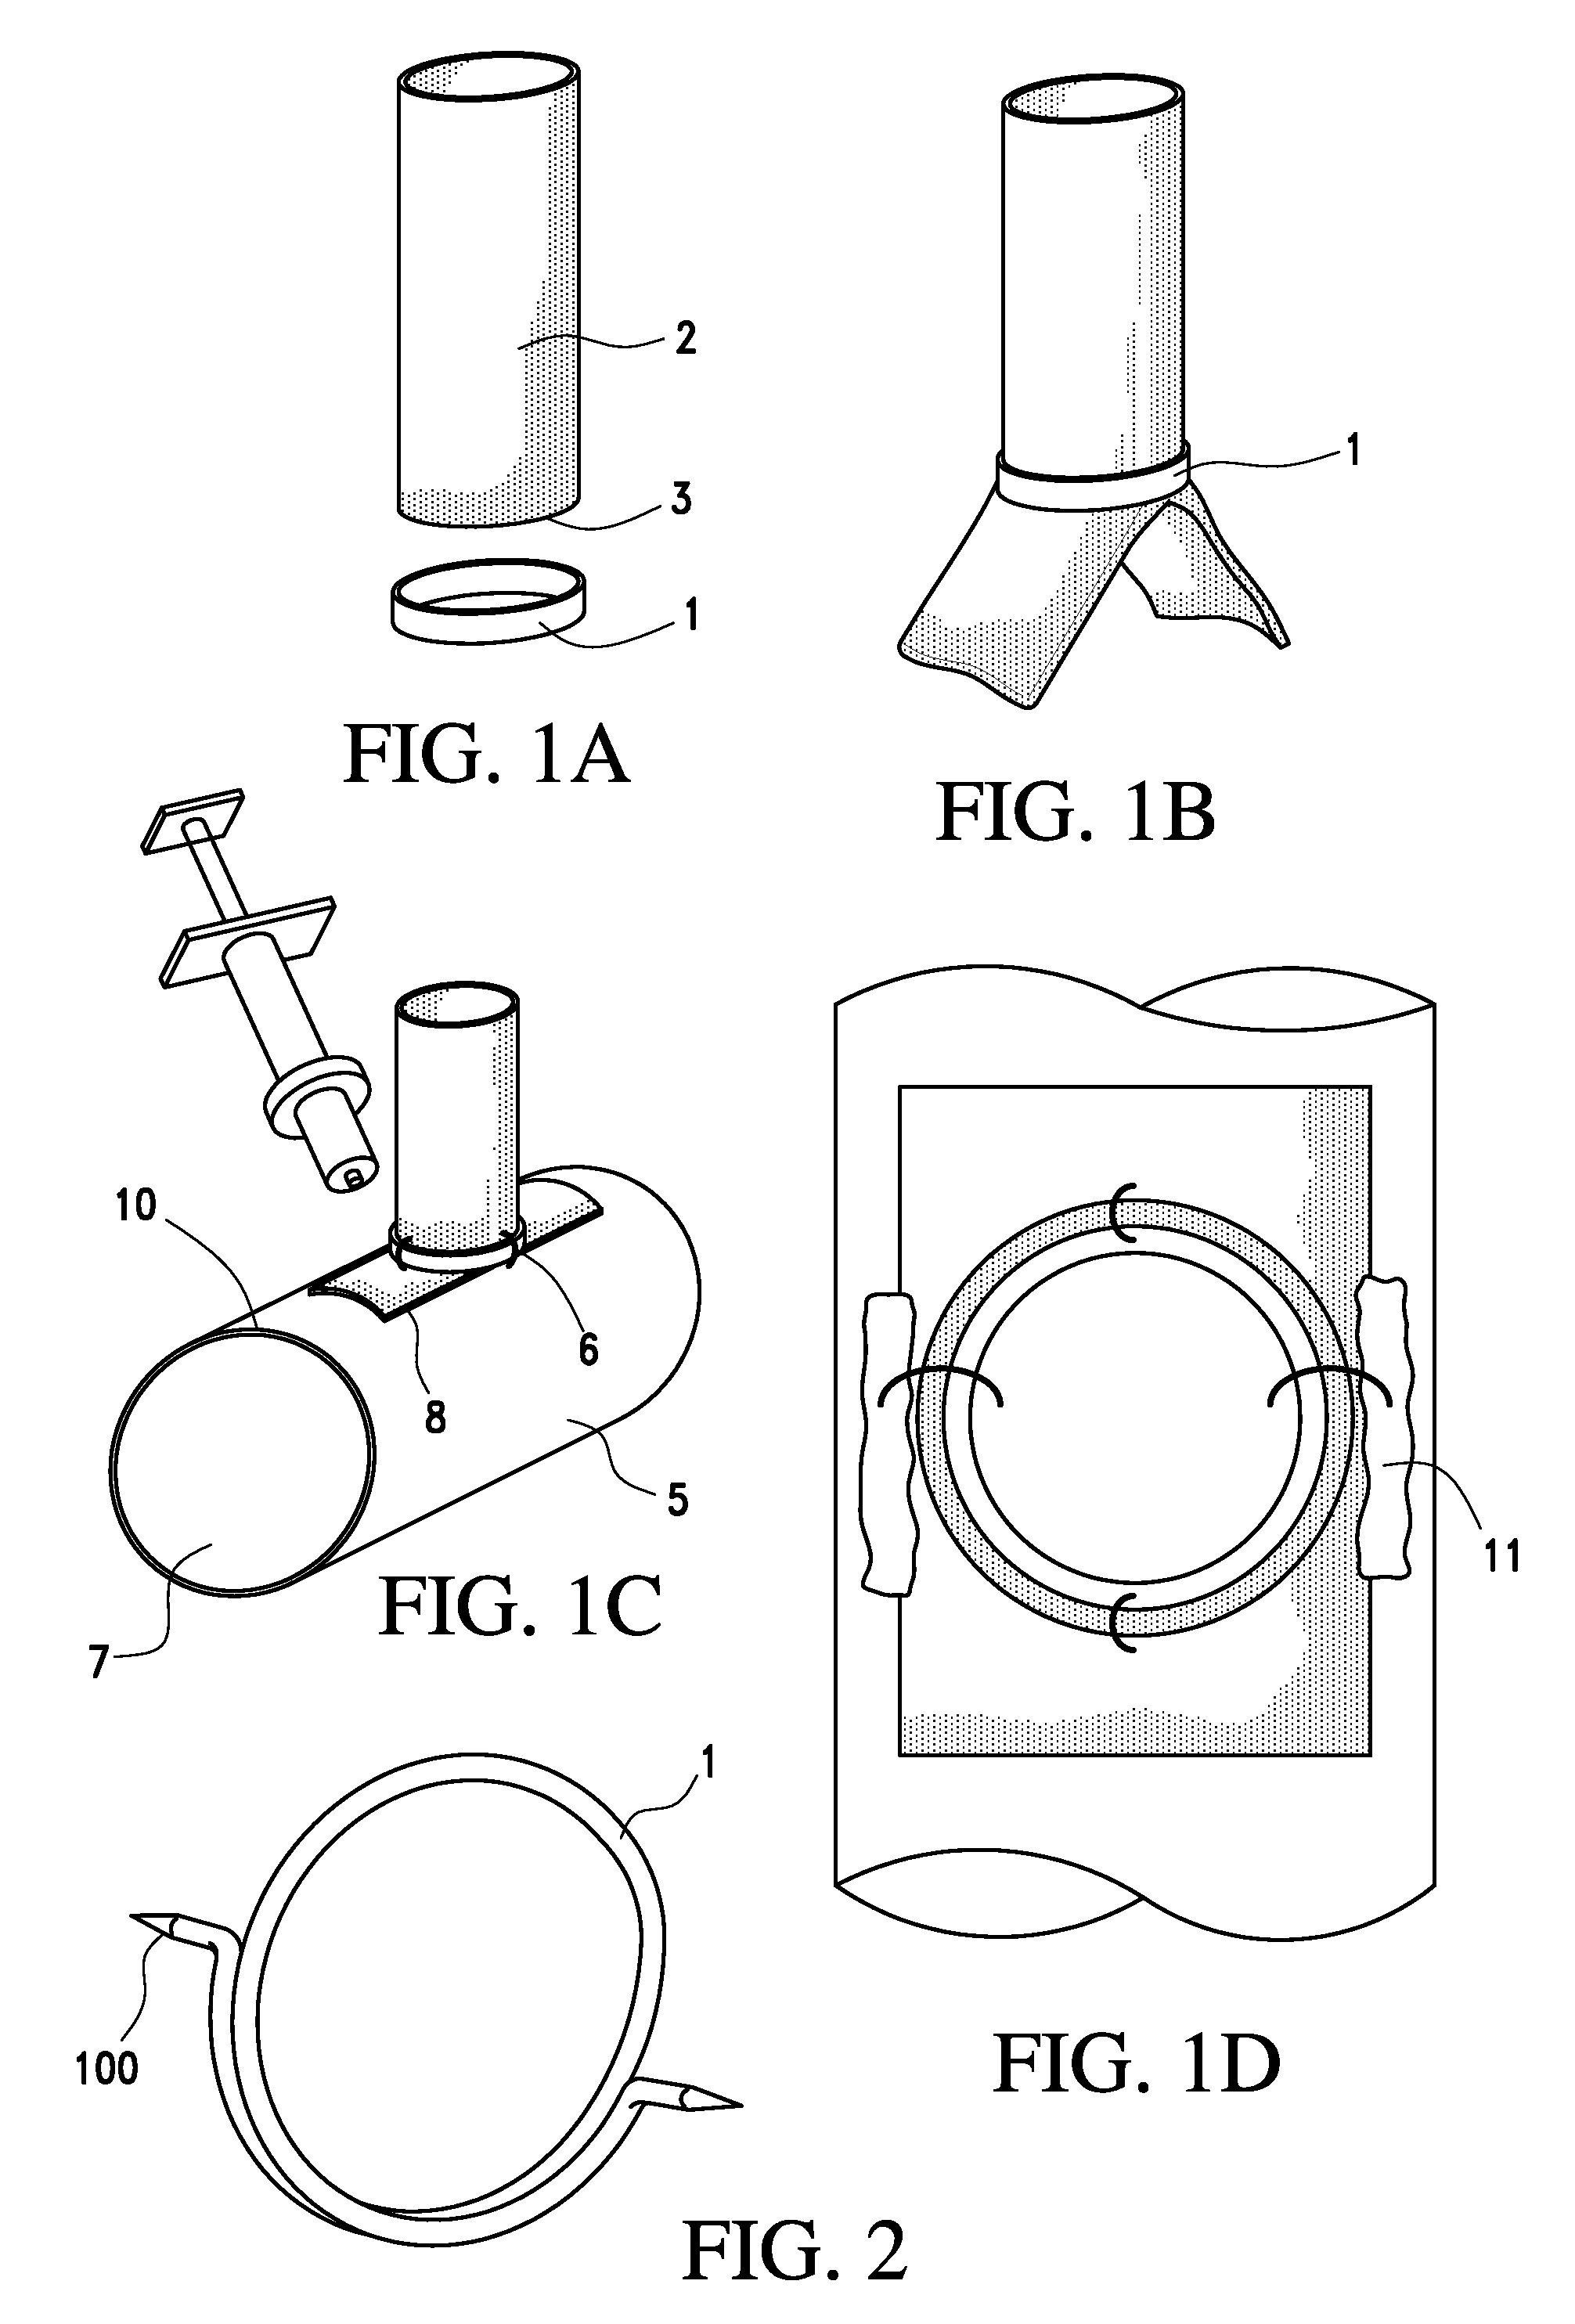 Device and method for joining vessels in anastomosis